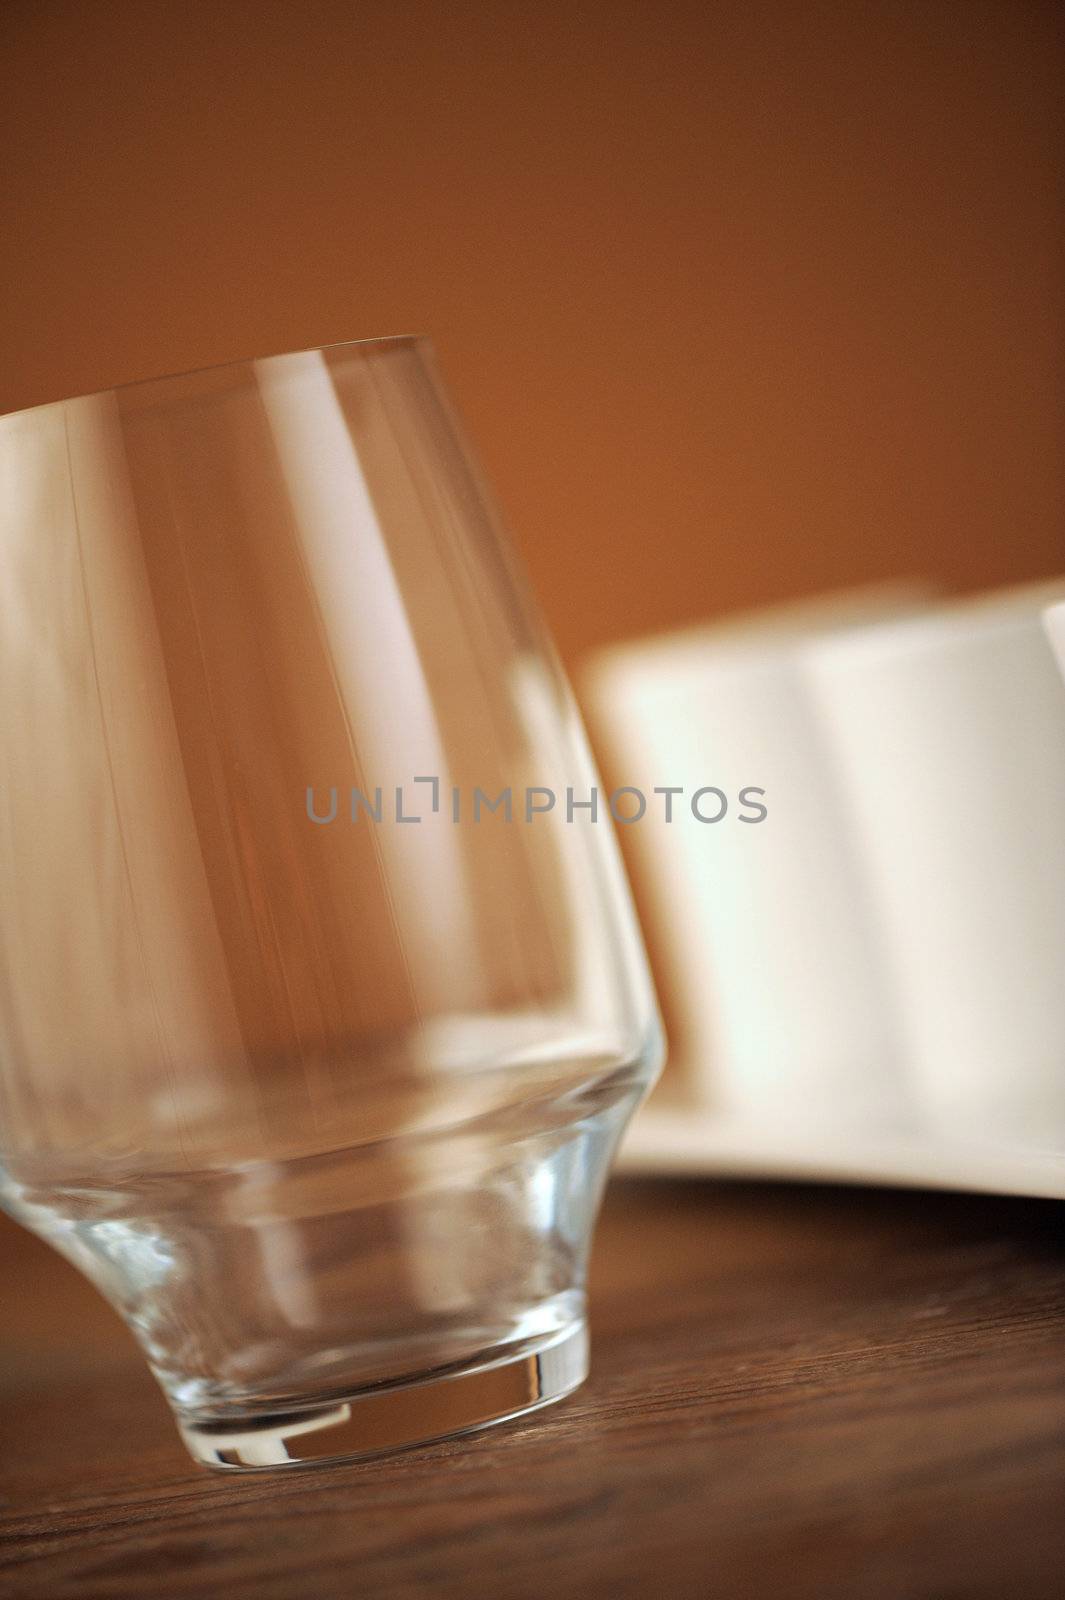 glass on table, close up, shallow dof by stokkete